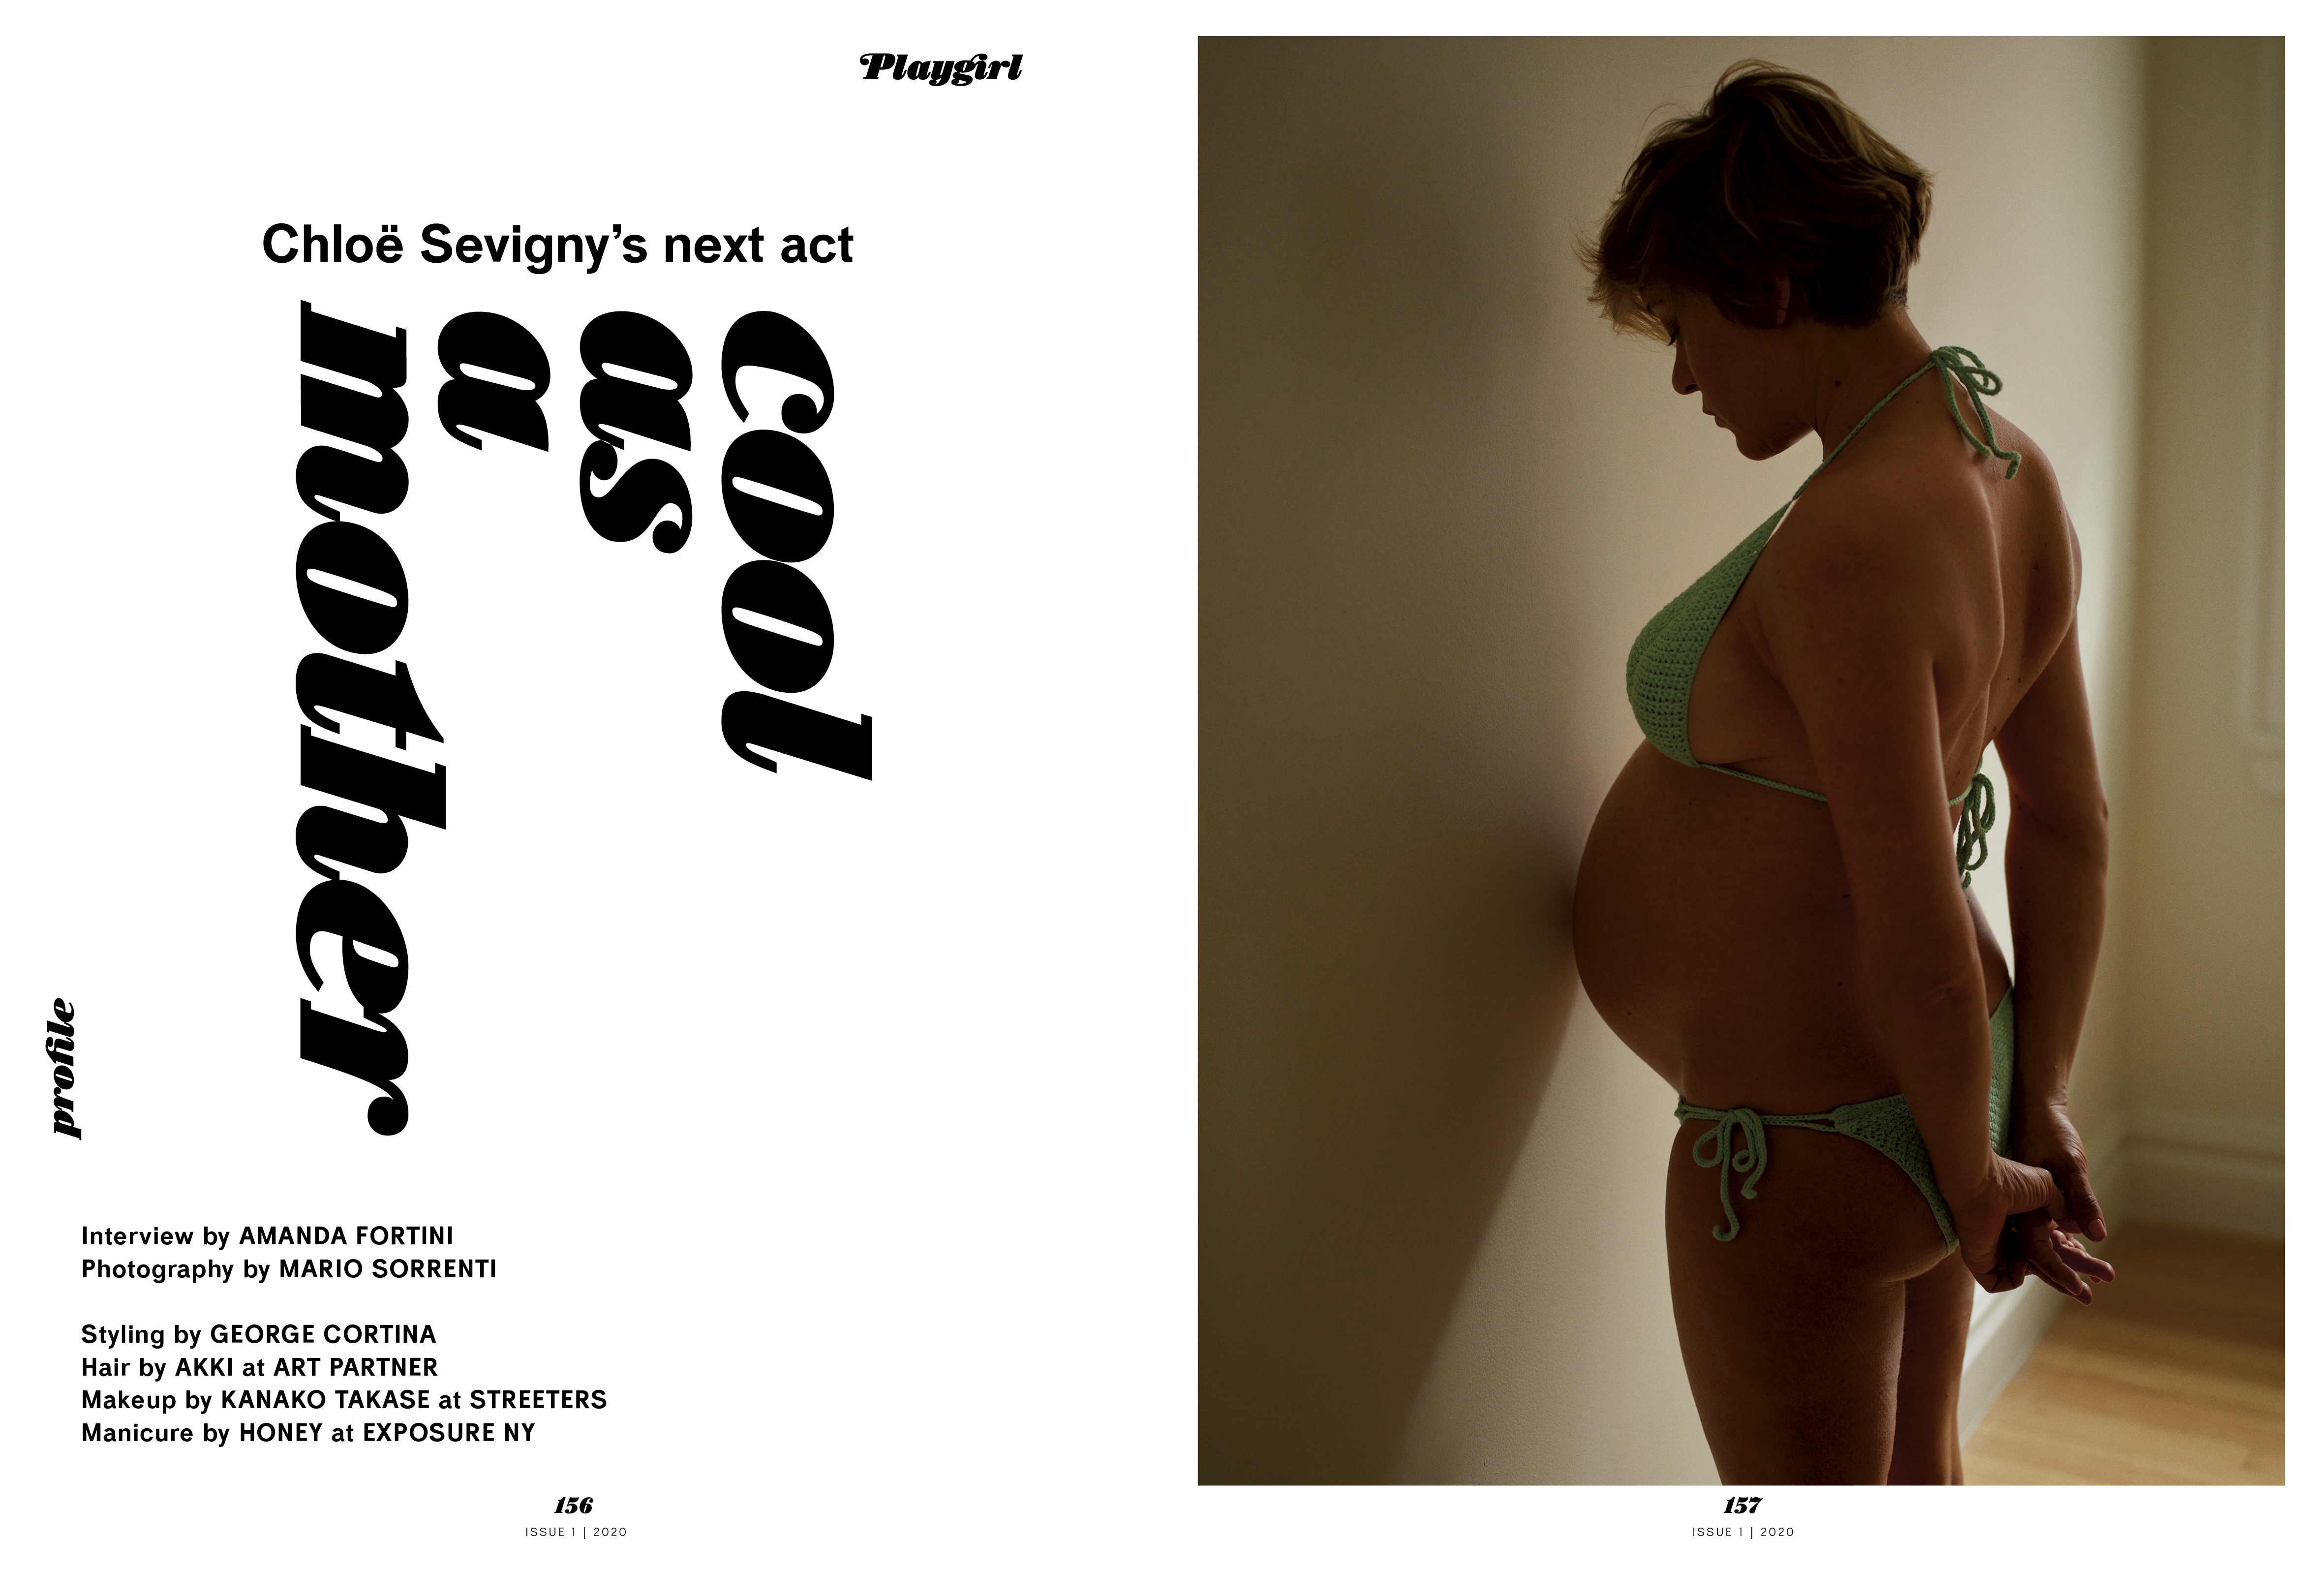 Naked Pregnant Magazine - A naked, pregnant Chloe Sevigny covers the new Playgirl - i-D